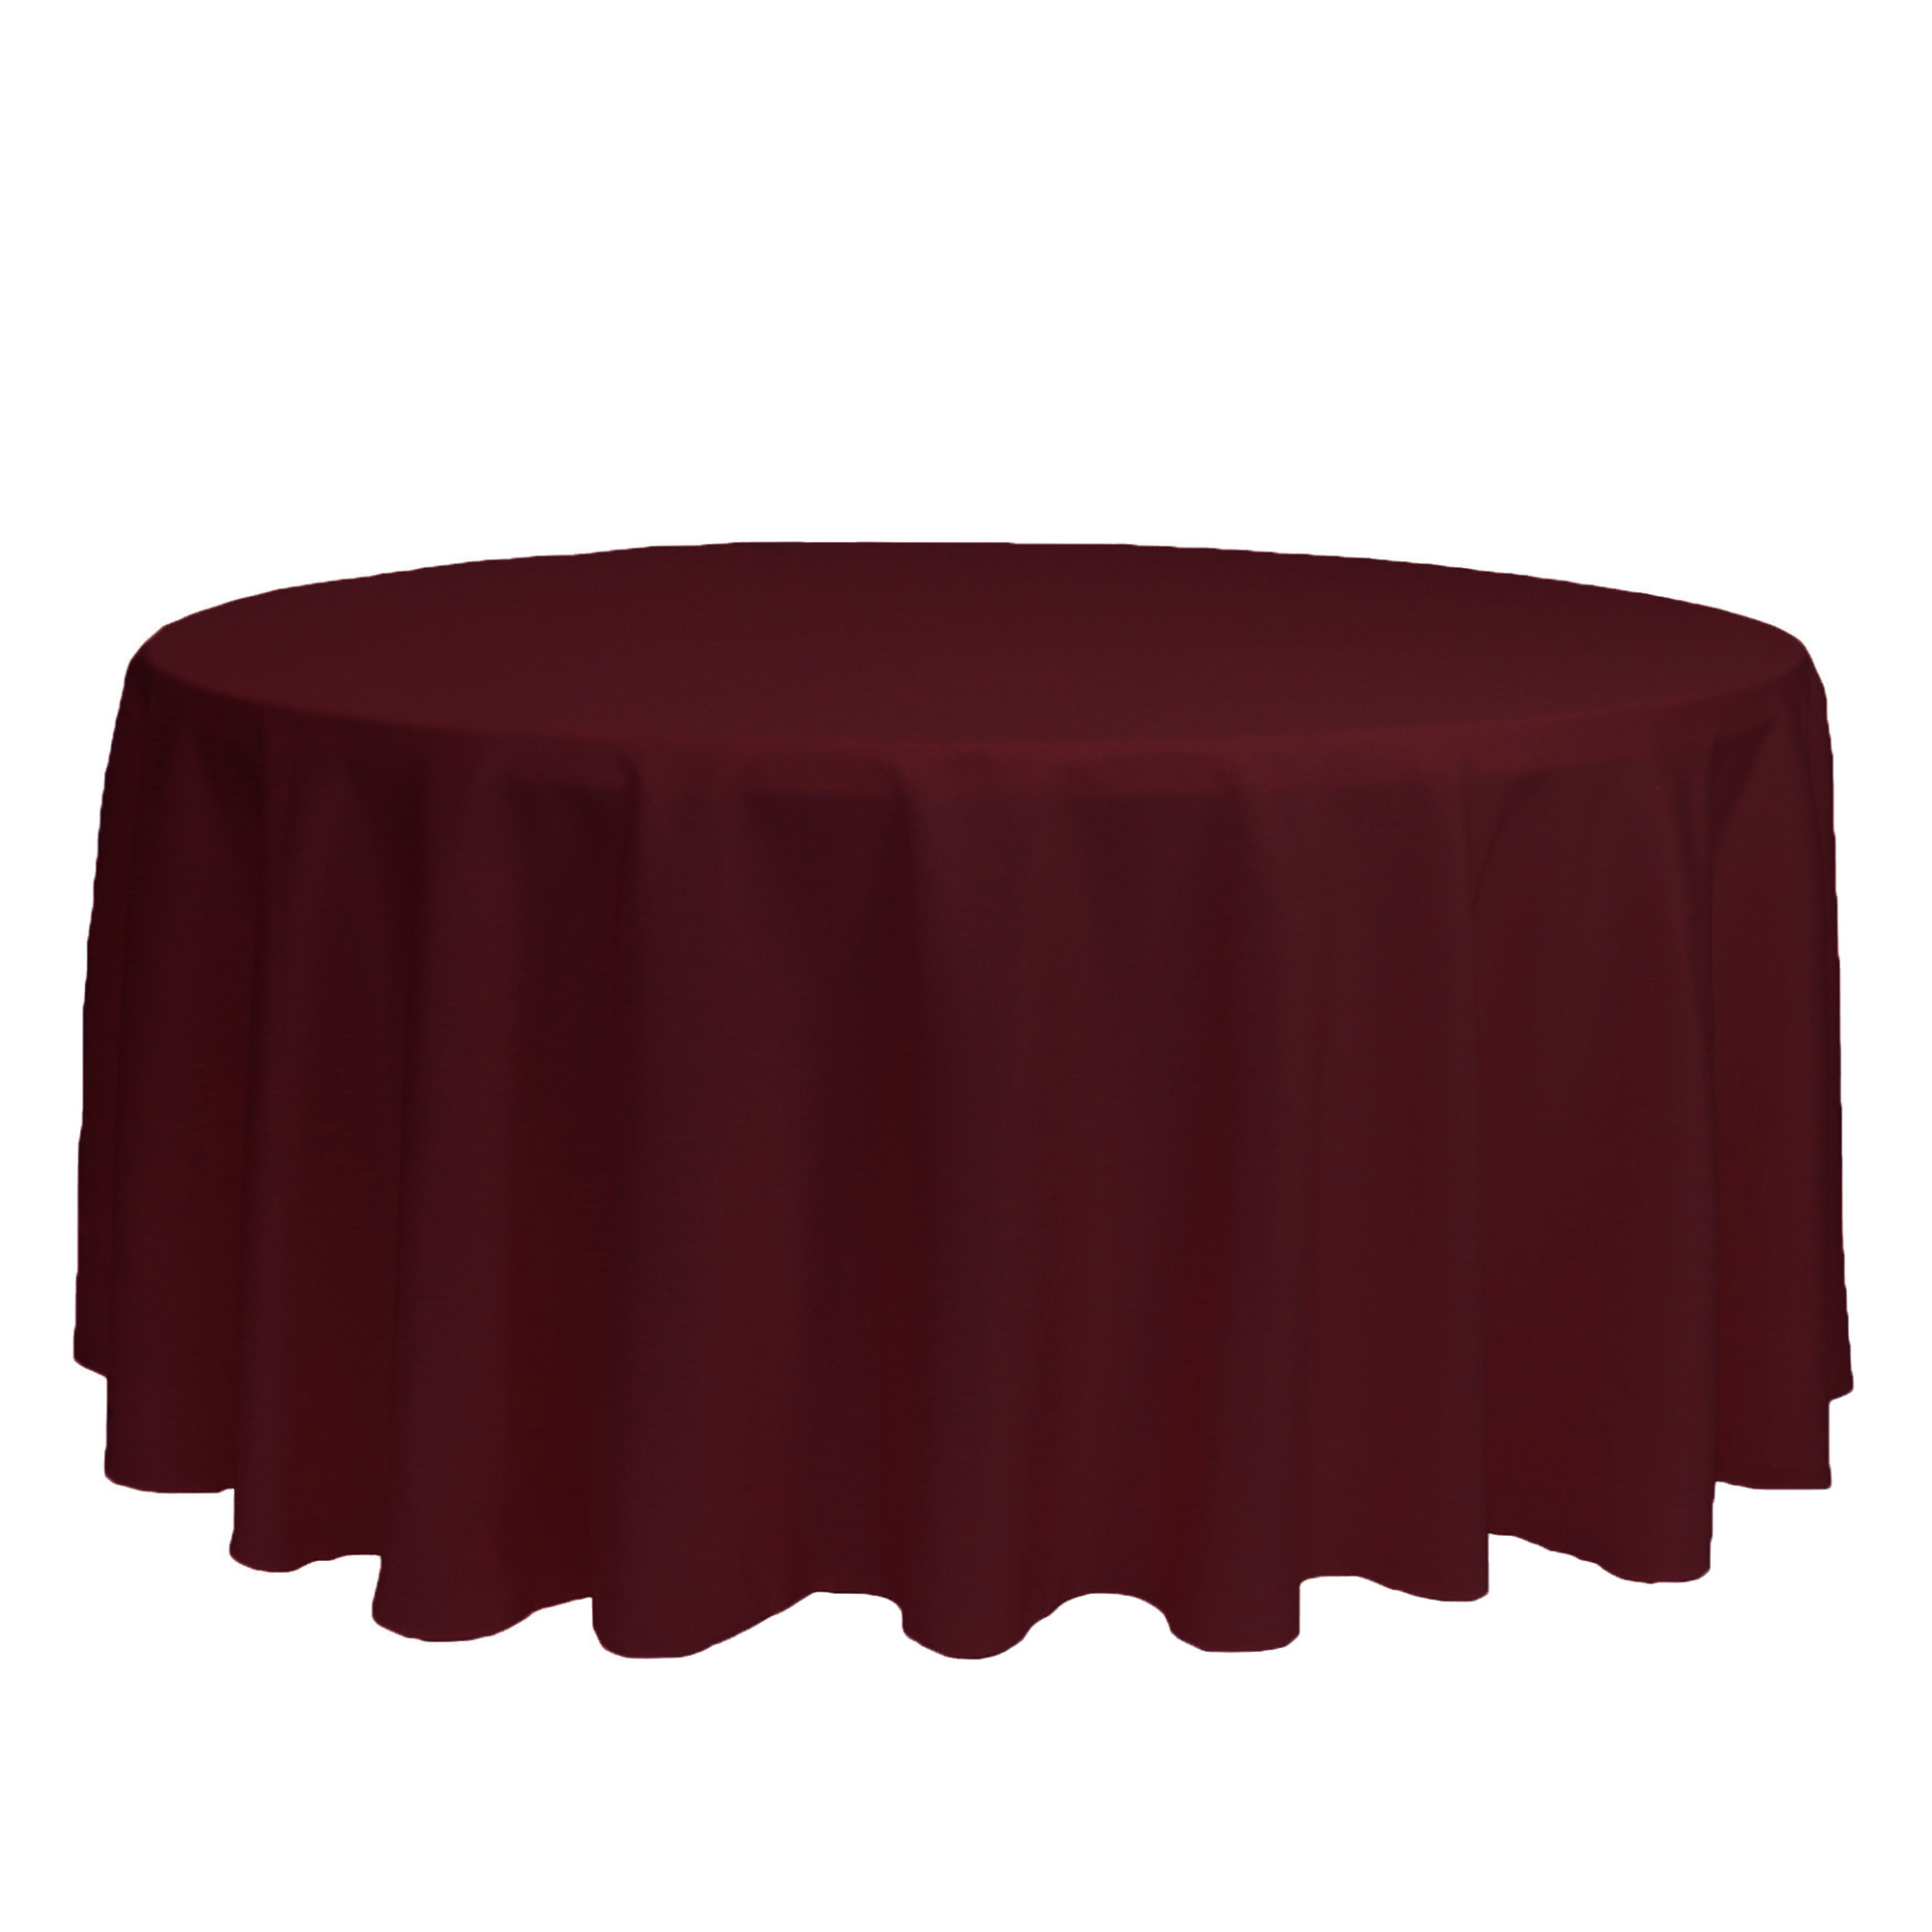 10 PACKS 132" inch Round SATIN Tablecloth WEDDING 25 COLOR 6' Ft table USA SALE 